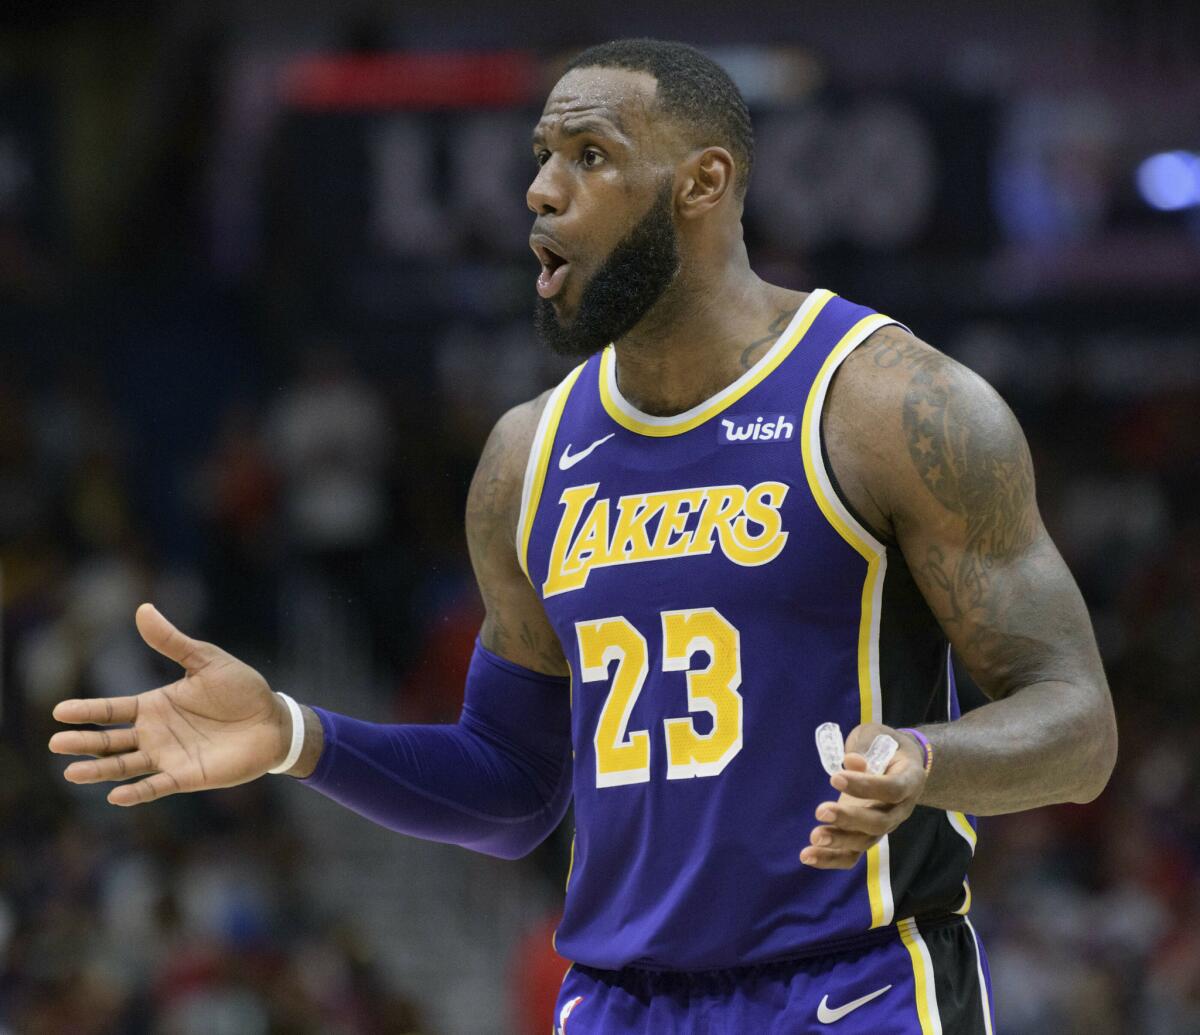 Los Angeles Lakers forward LeBron James (23) reacts to a call against the New Orleans Pelicans in the second half of an NBA basketball game in New Orleans, La. Saturday, Feb. 23, 2019.